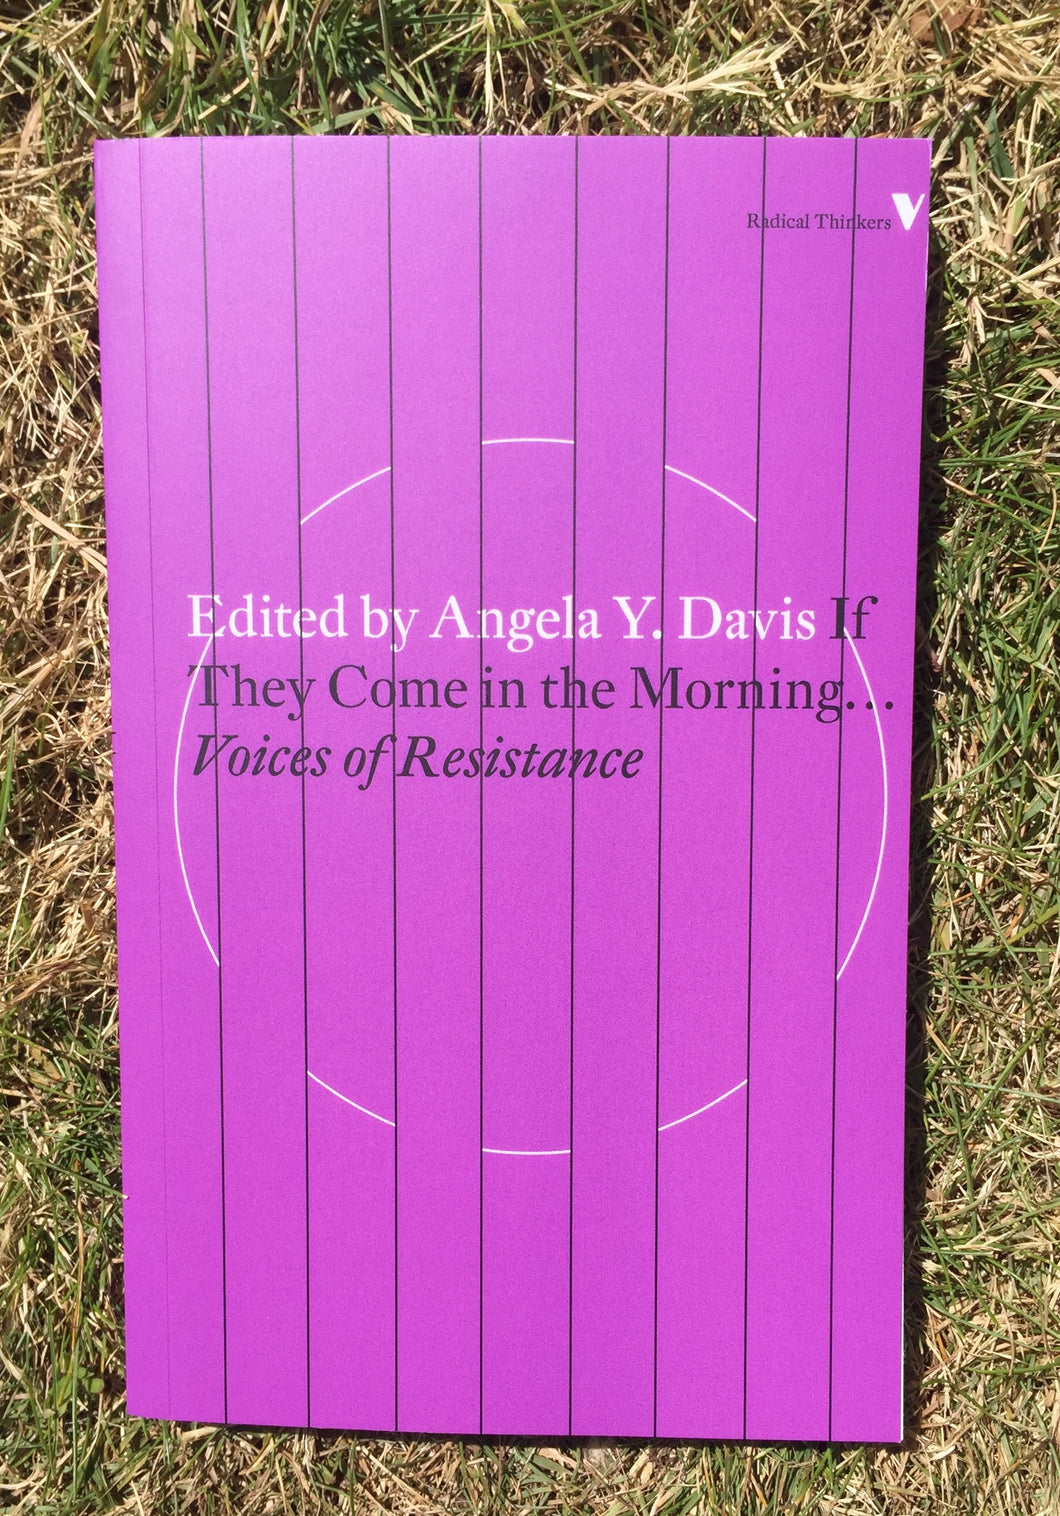 If They Come in the Morning … Voices of Resistance Book Edited by Angela Y. Davis